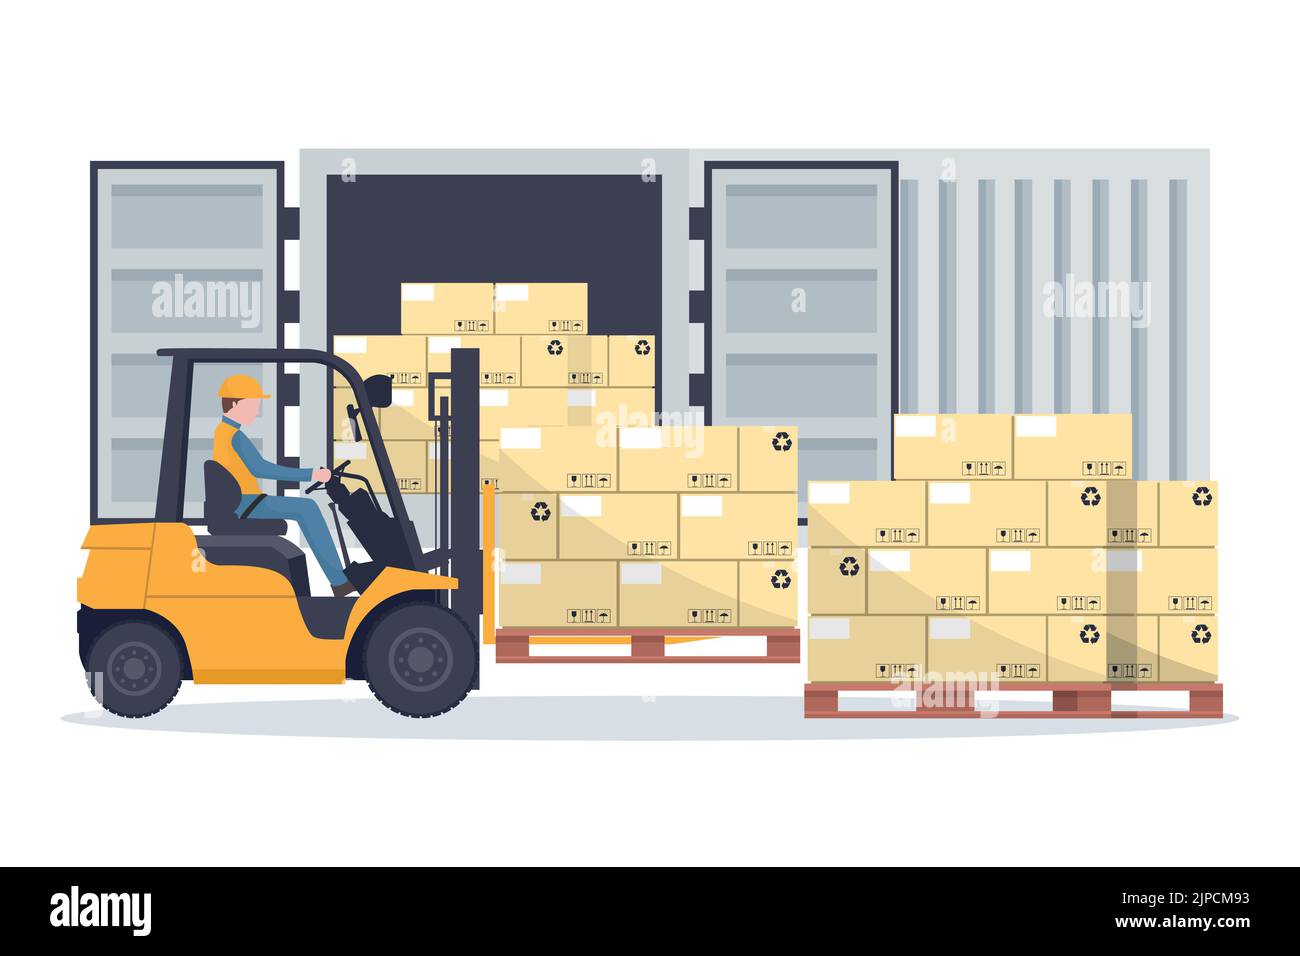 Forklift truck loading pallet with stacked boxes to a cargo container or shipping container for storage and transportation of merchandise. Industrial Stock Vector